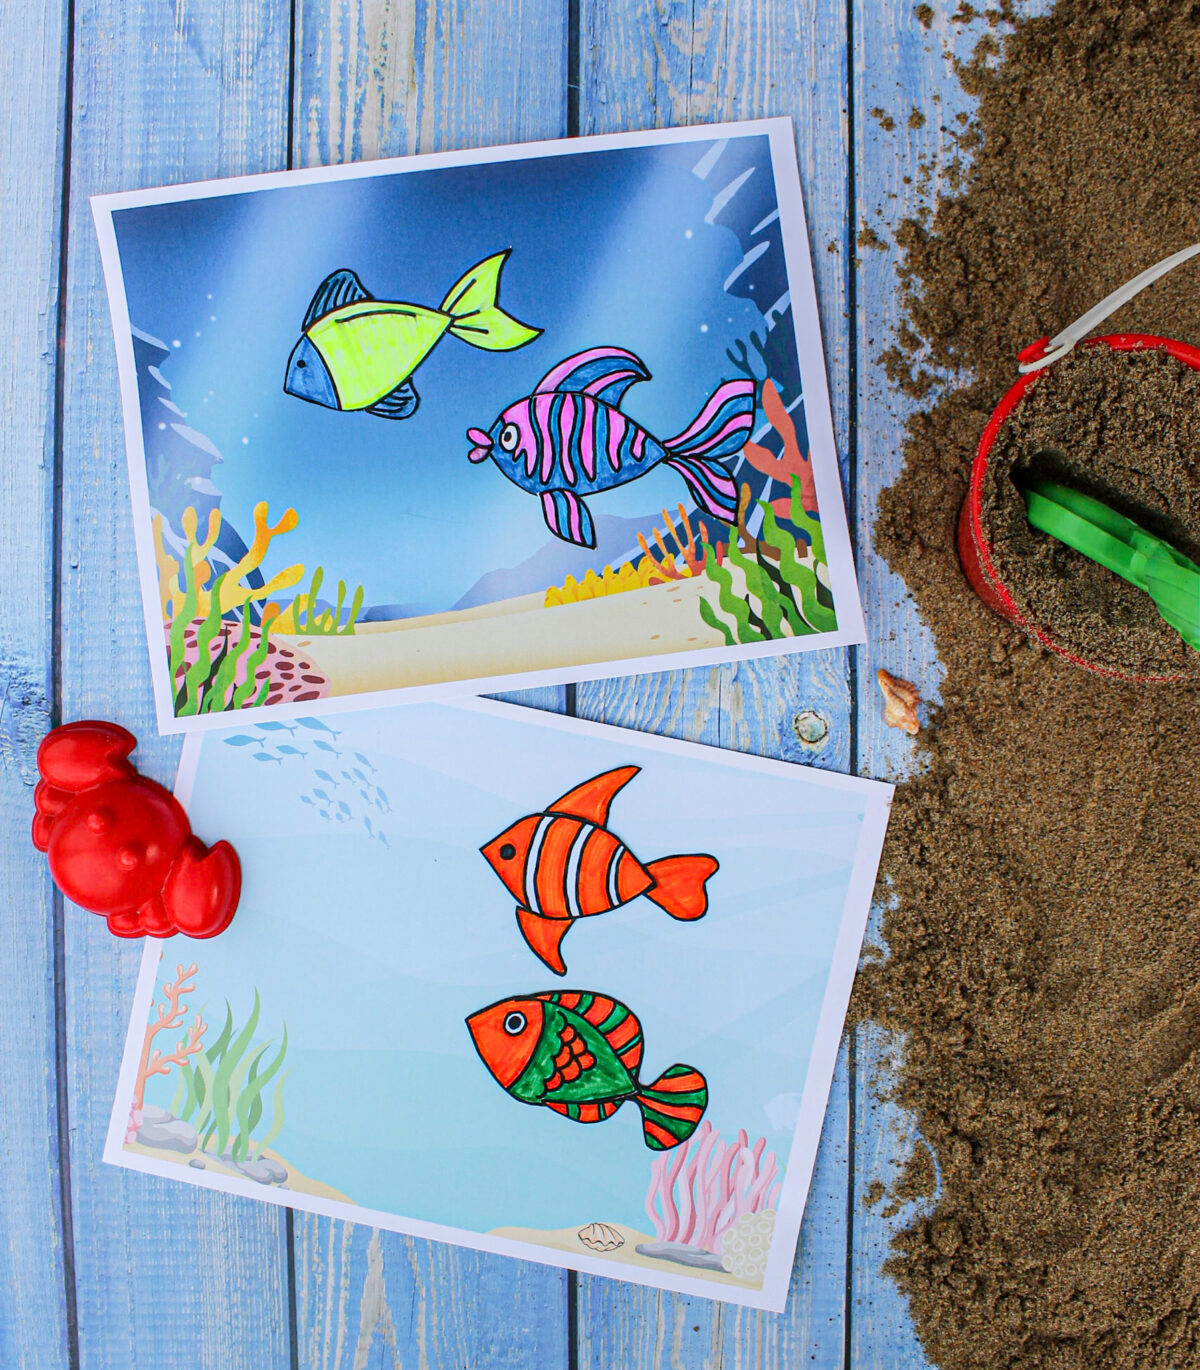 Examples of completed fish crafts